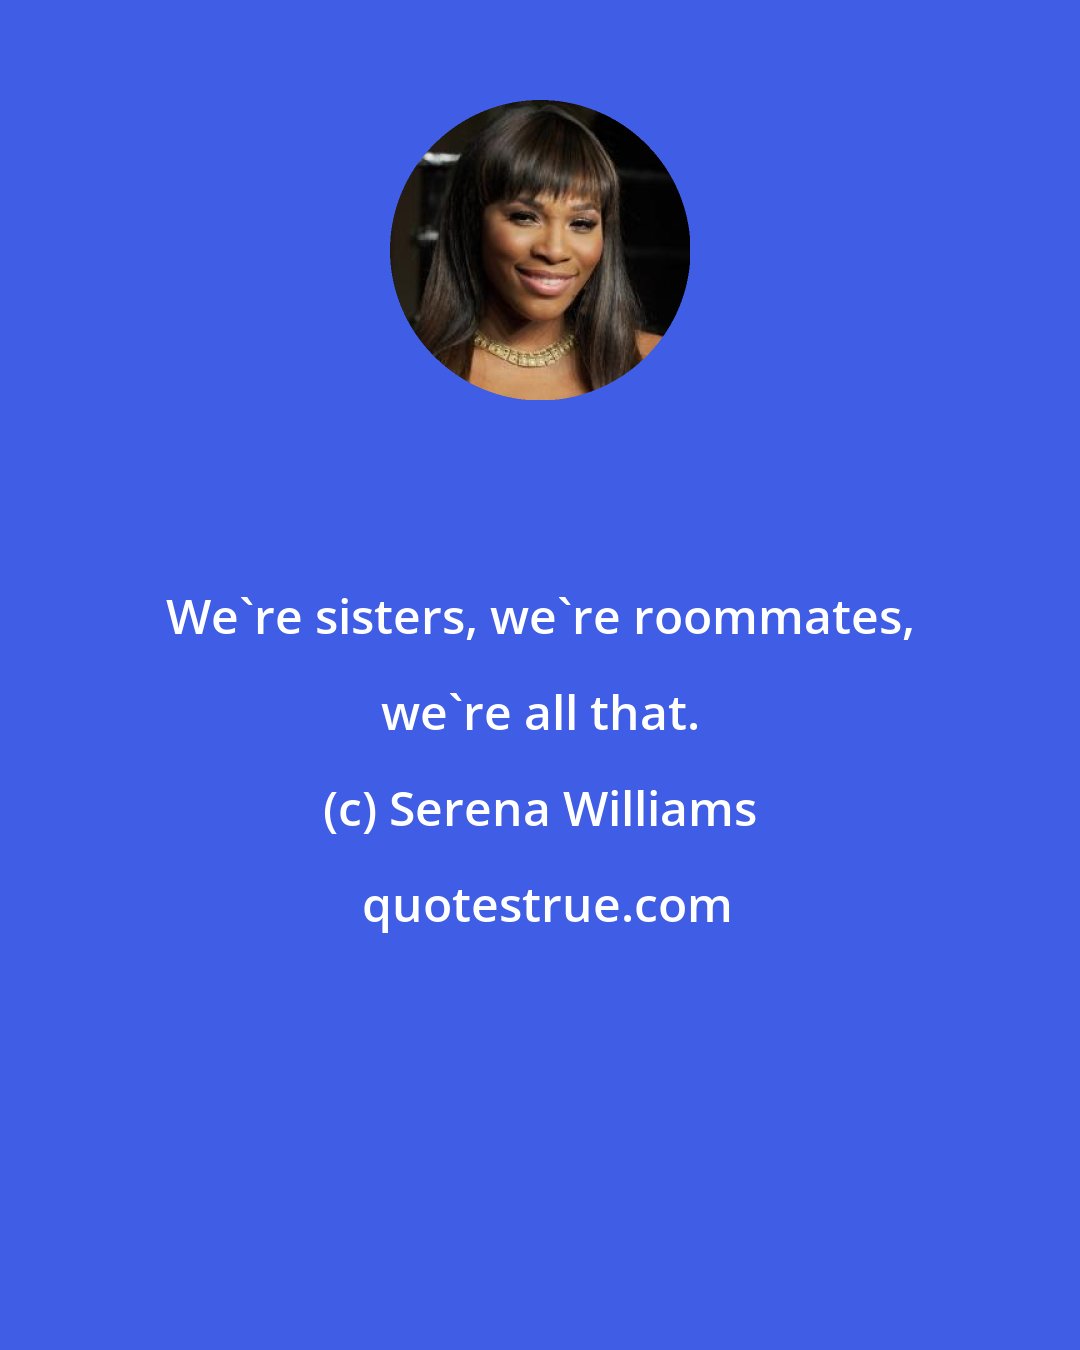 Serena Williams: We're sisters, we're roommates, we're all that.